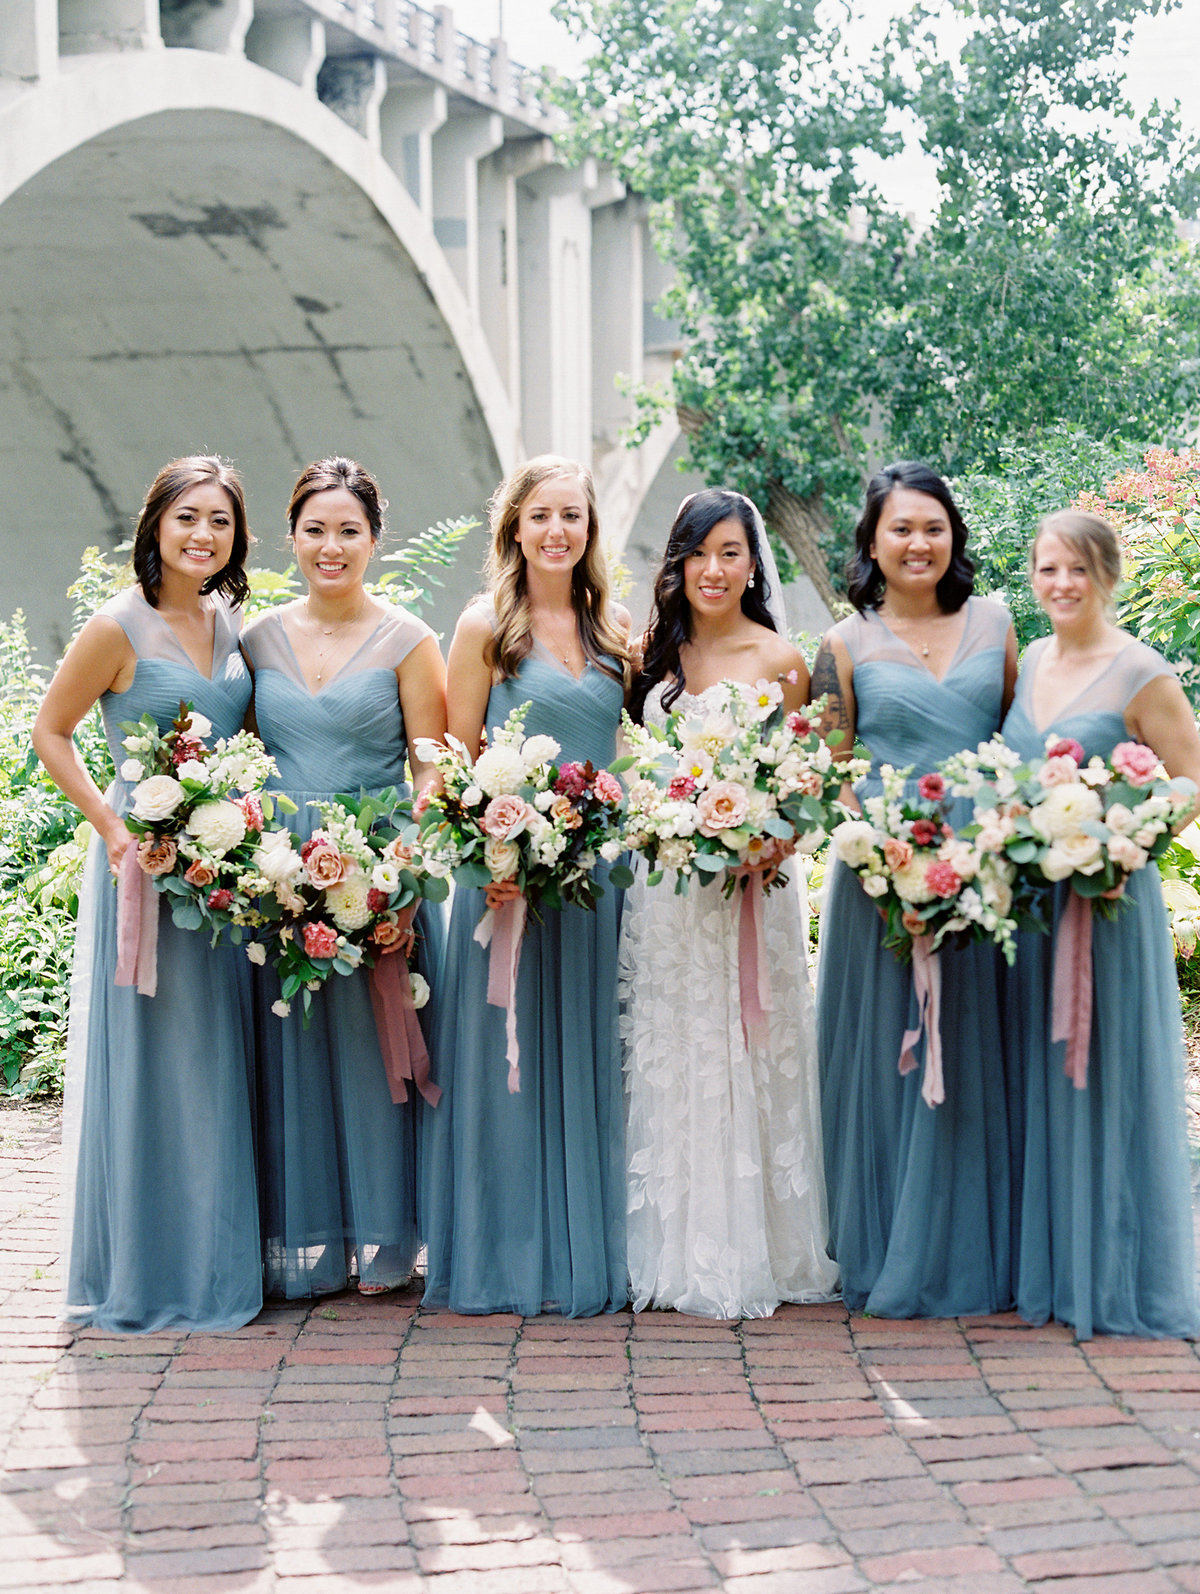 whimsical wedding bouquets